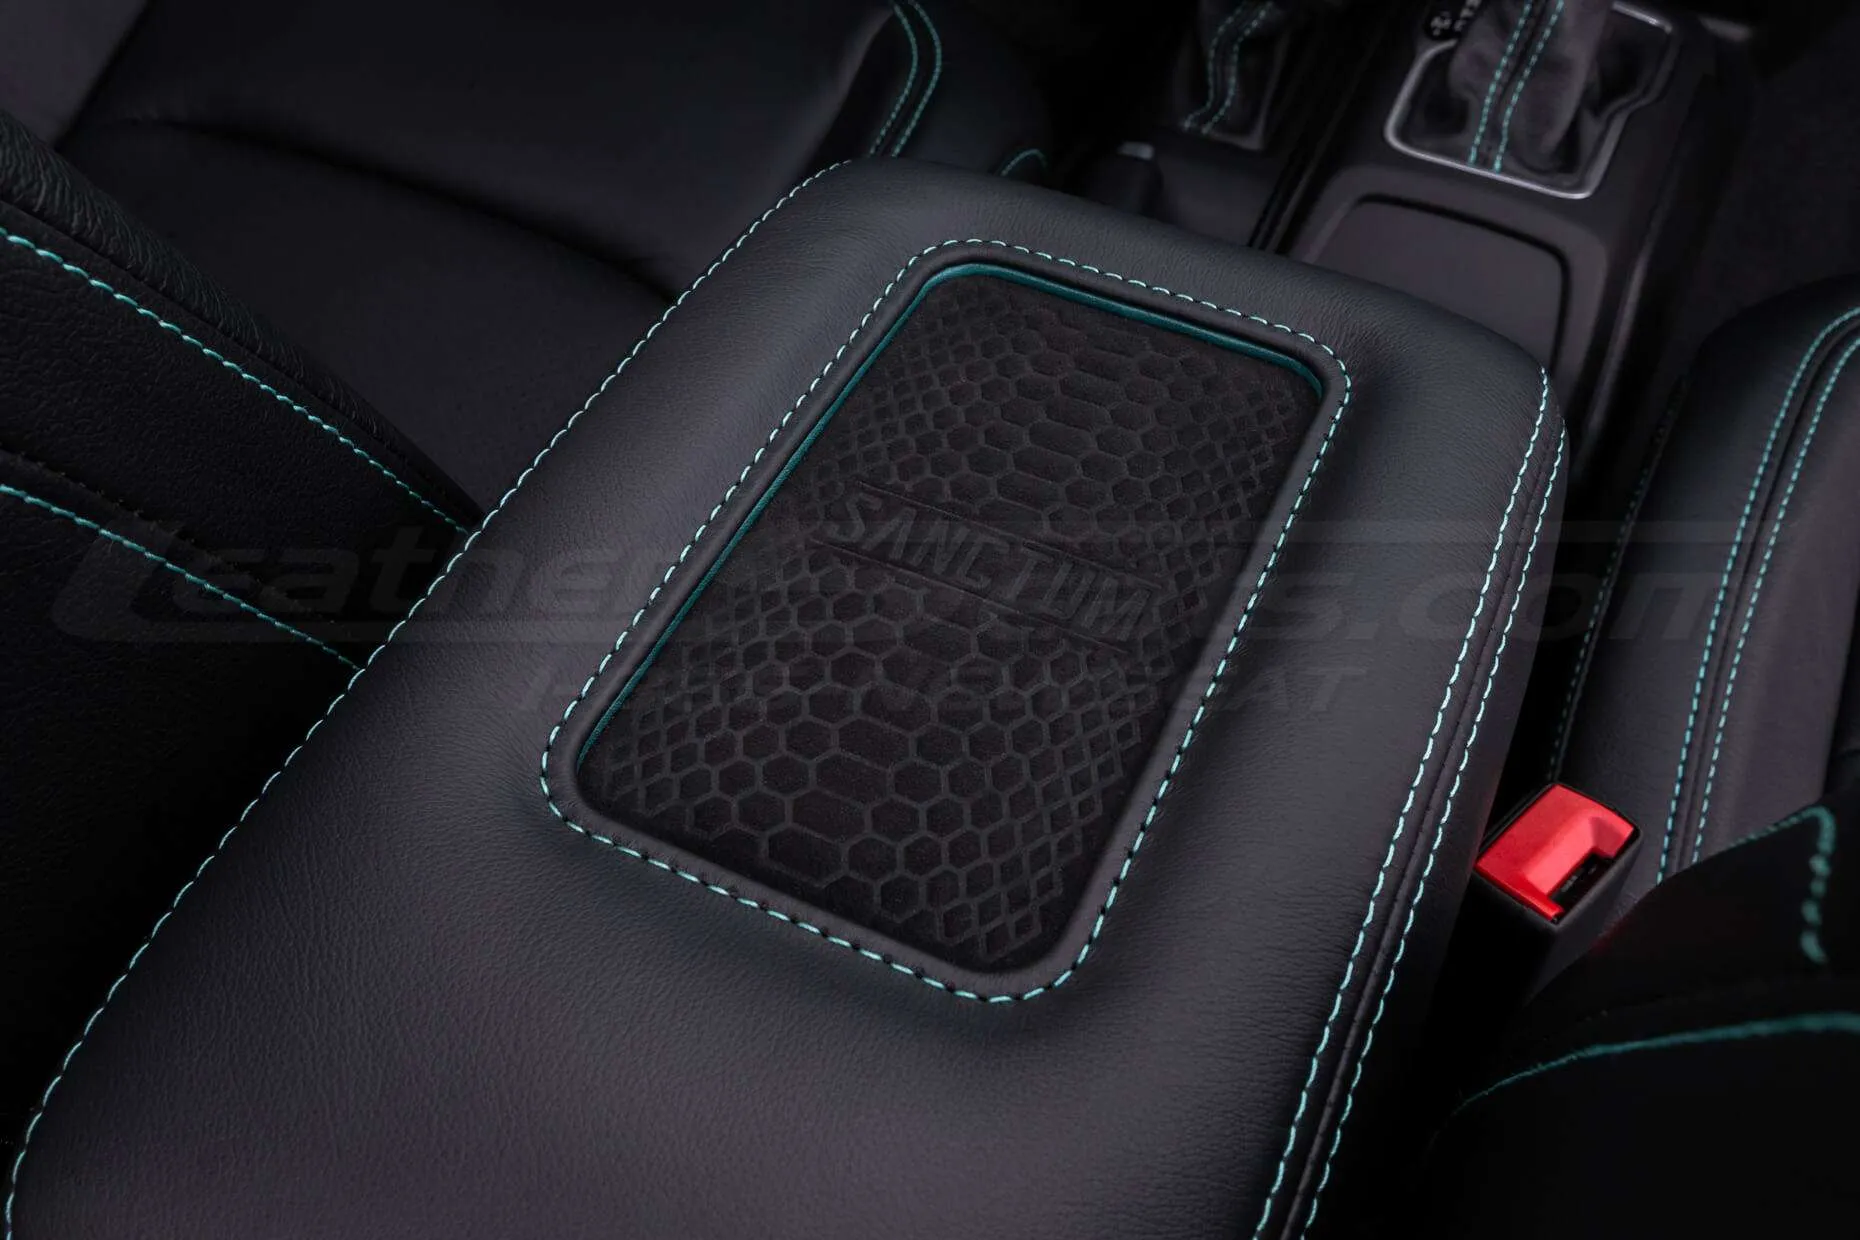 Jeep Wrangler JL Upholstery Kit - Black - Installed - Sanctum console charging pad & turquoise stitching